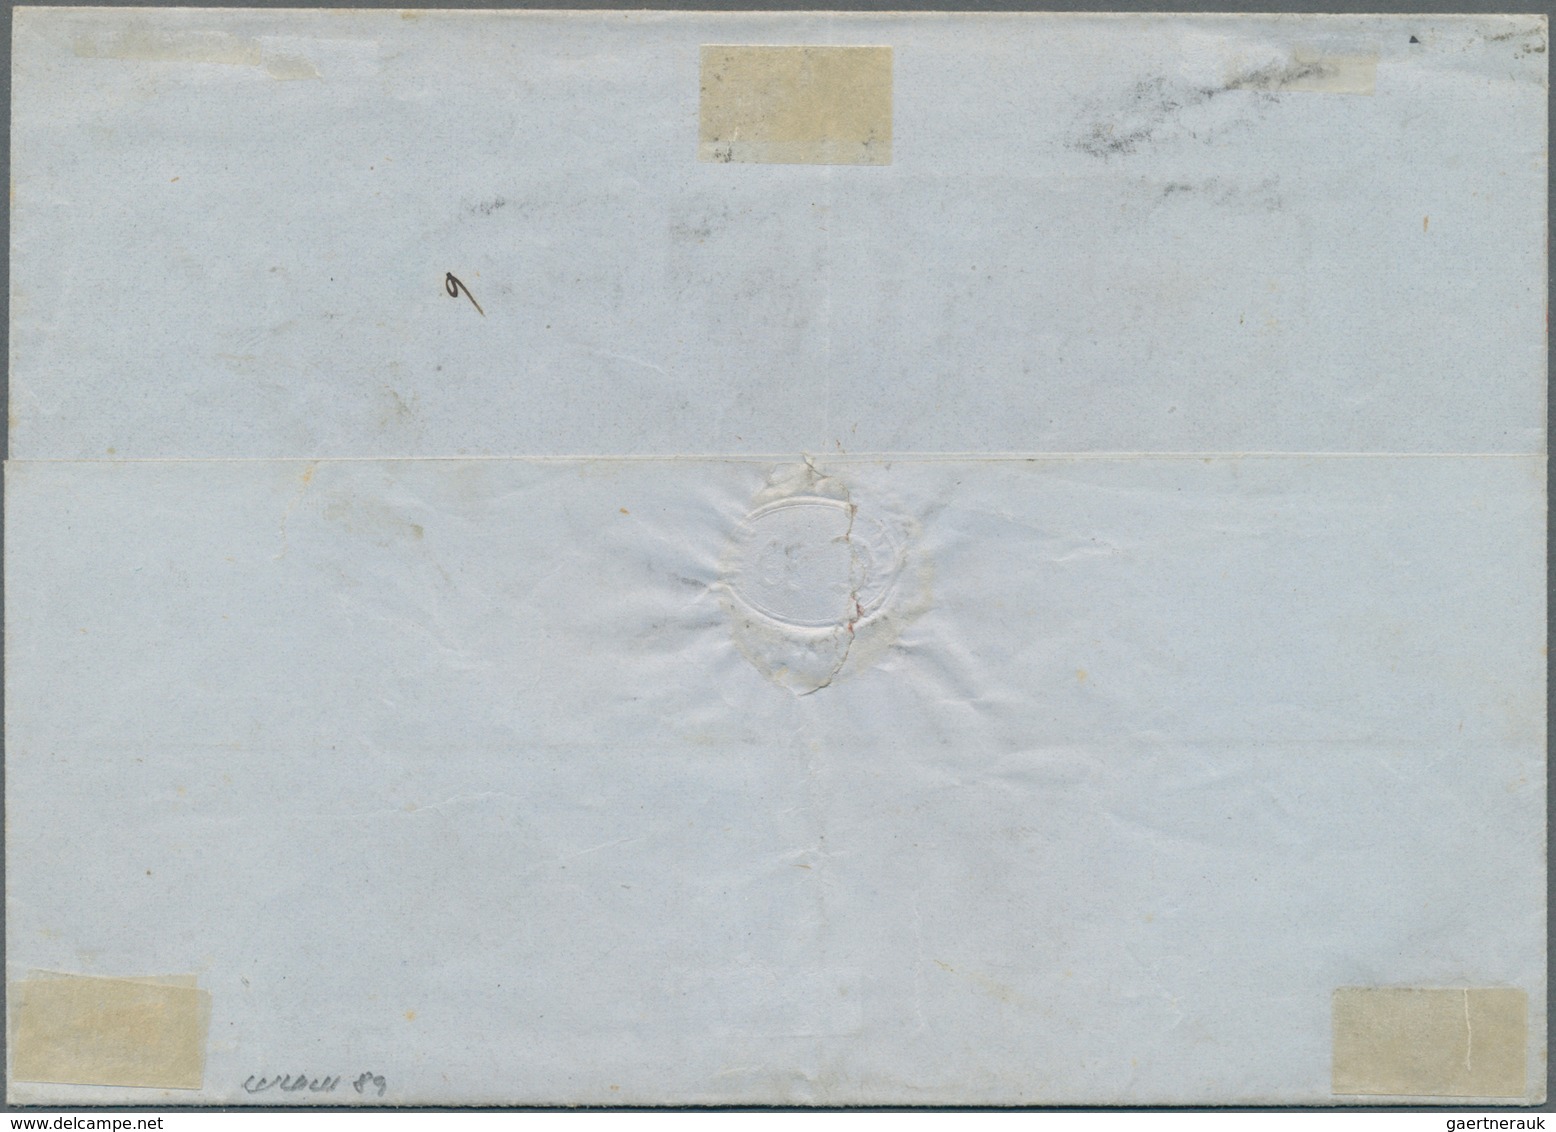 Türkei: 1870, Folded Envelope From Constantinople Franked Total 3 3/4 Pia. Canc. "Vapur" (ship) To B - Neufs